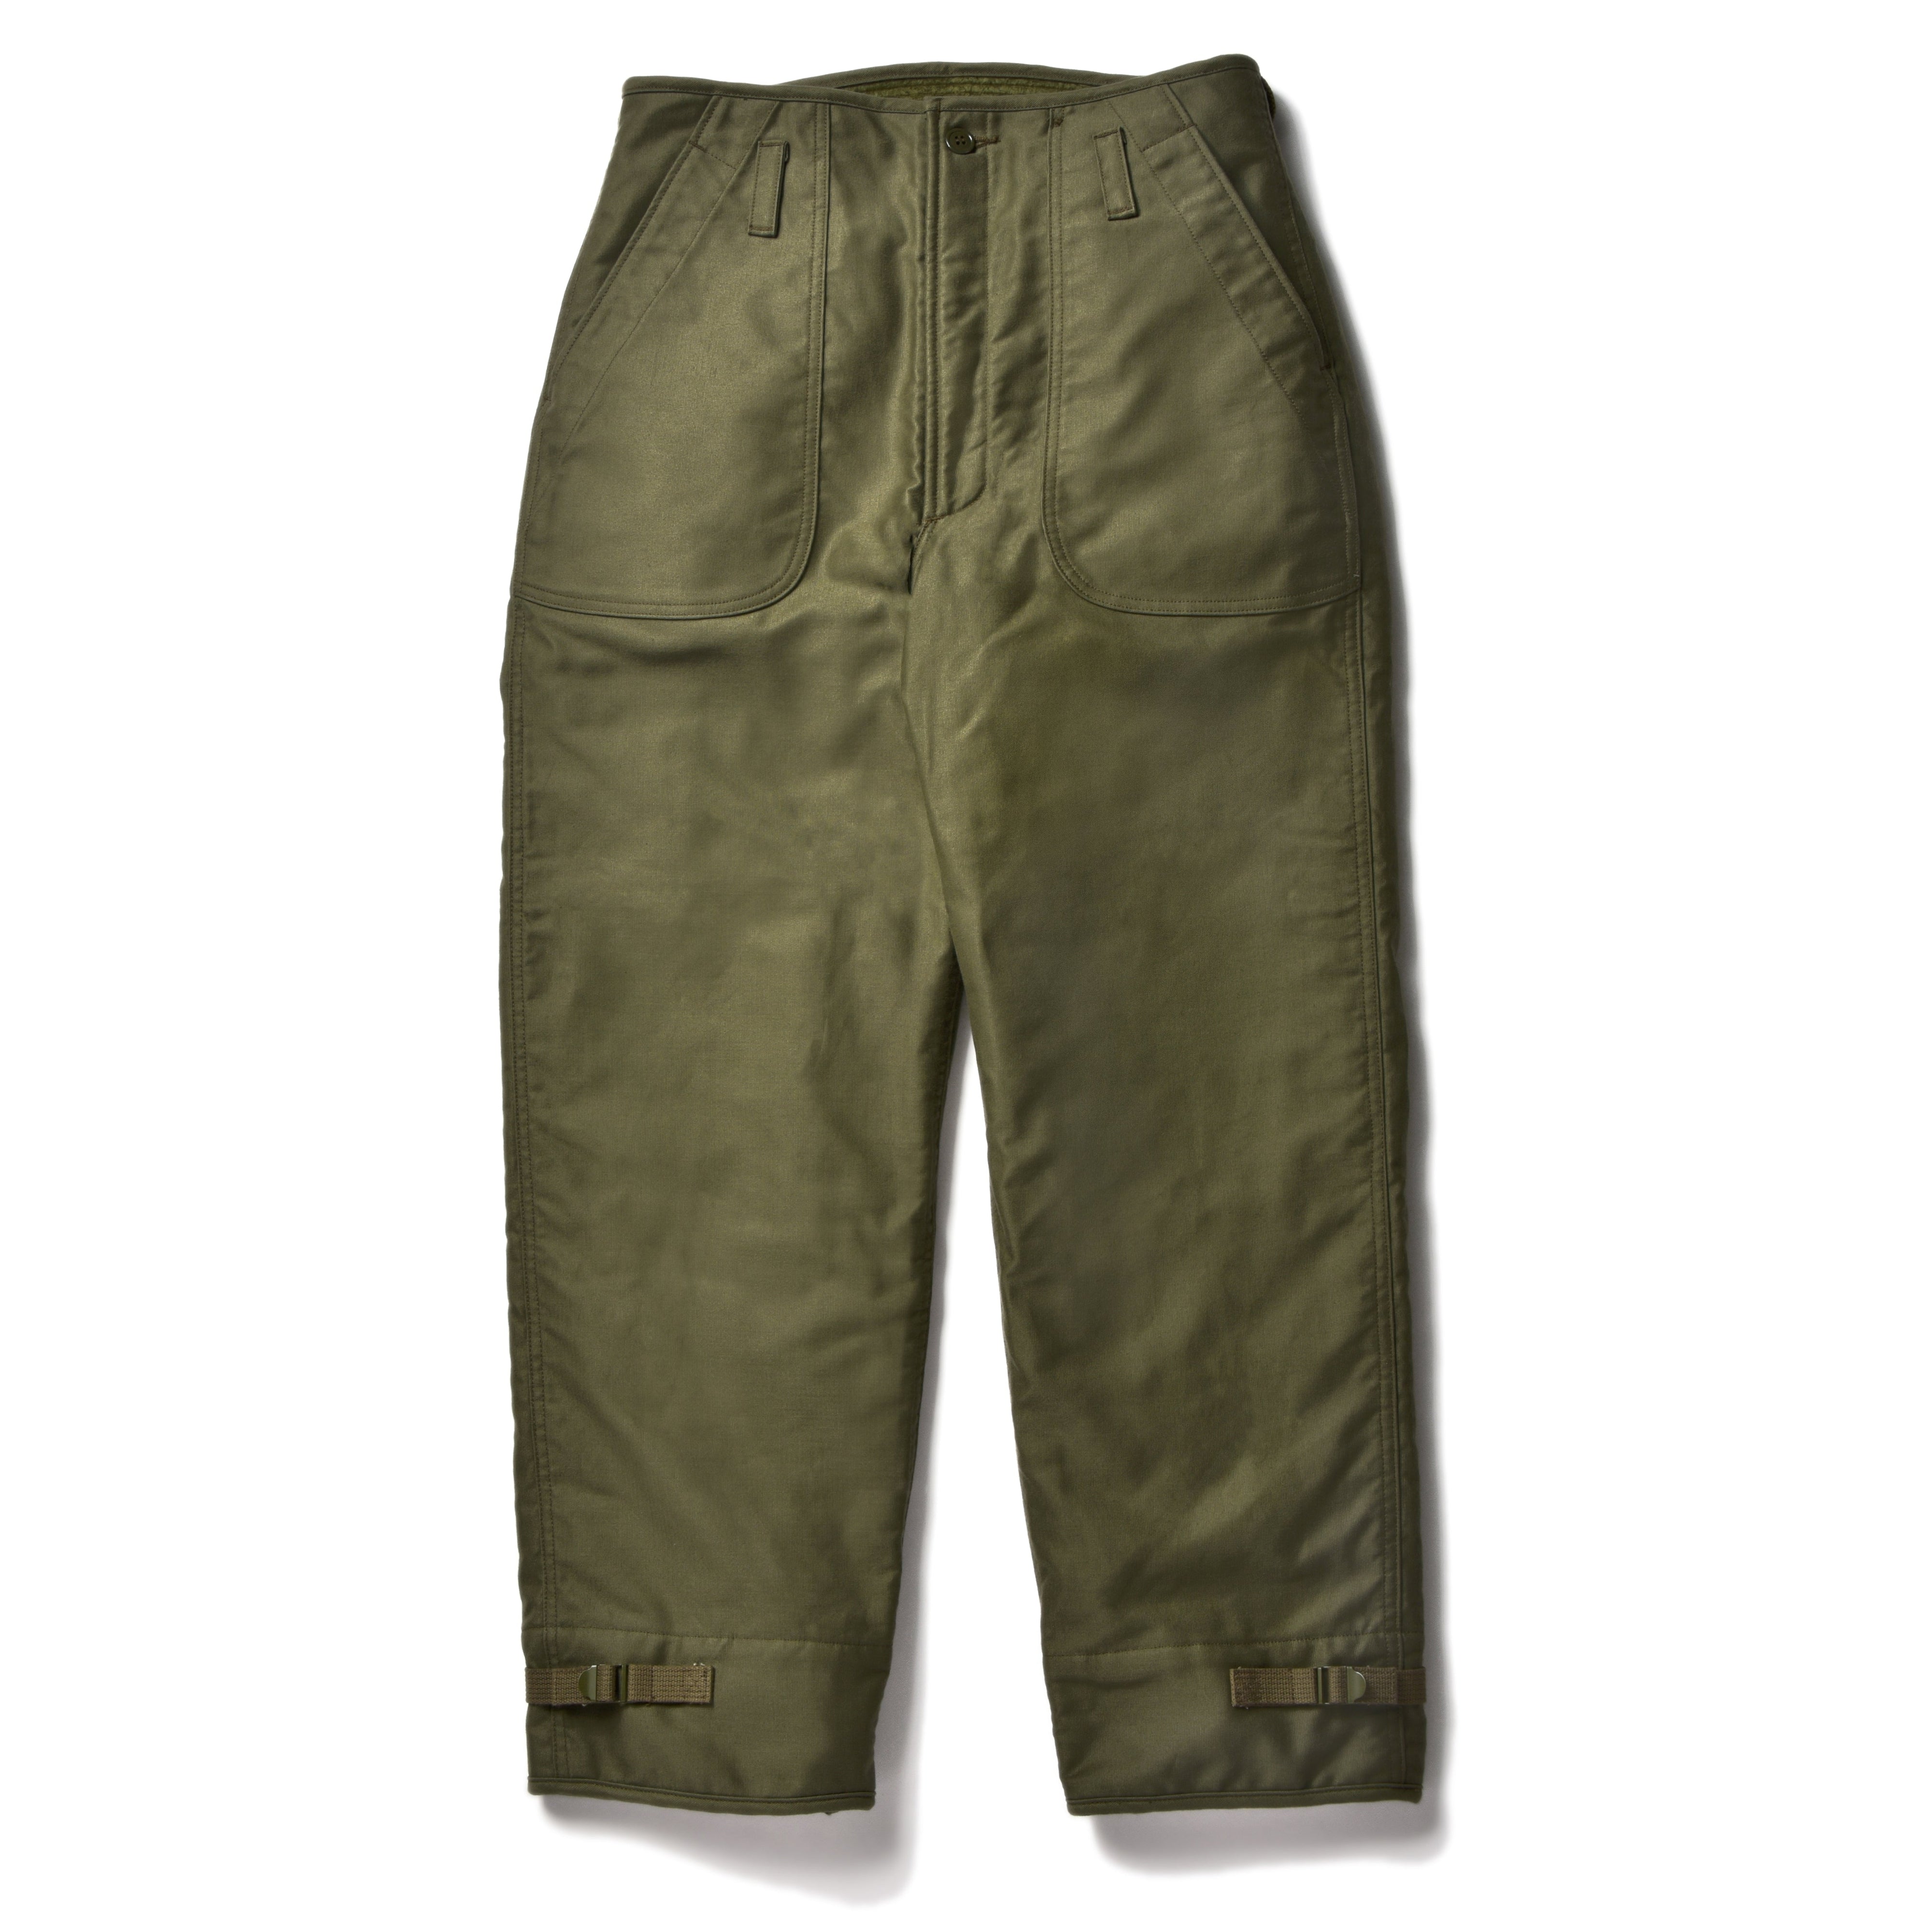 The Real McCoy's MP20105 Nylon Quilted Down Trousers Olive